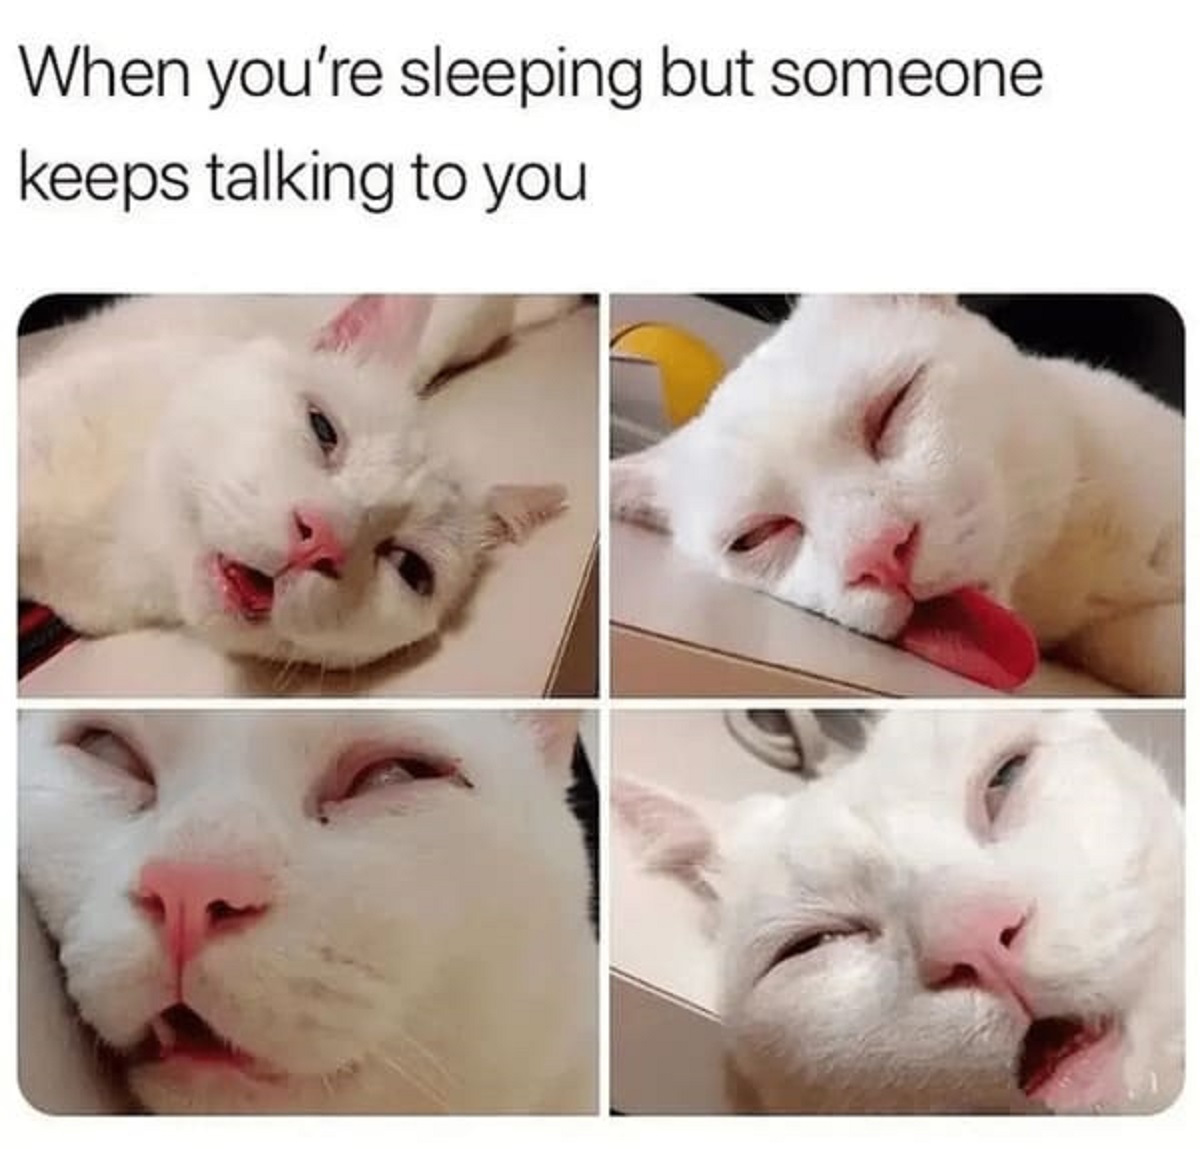 your sleeping but someone keeps talking - When you're sleeping but someone keeps talking to you